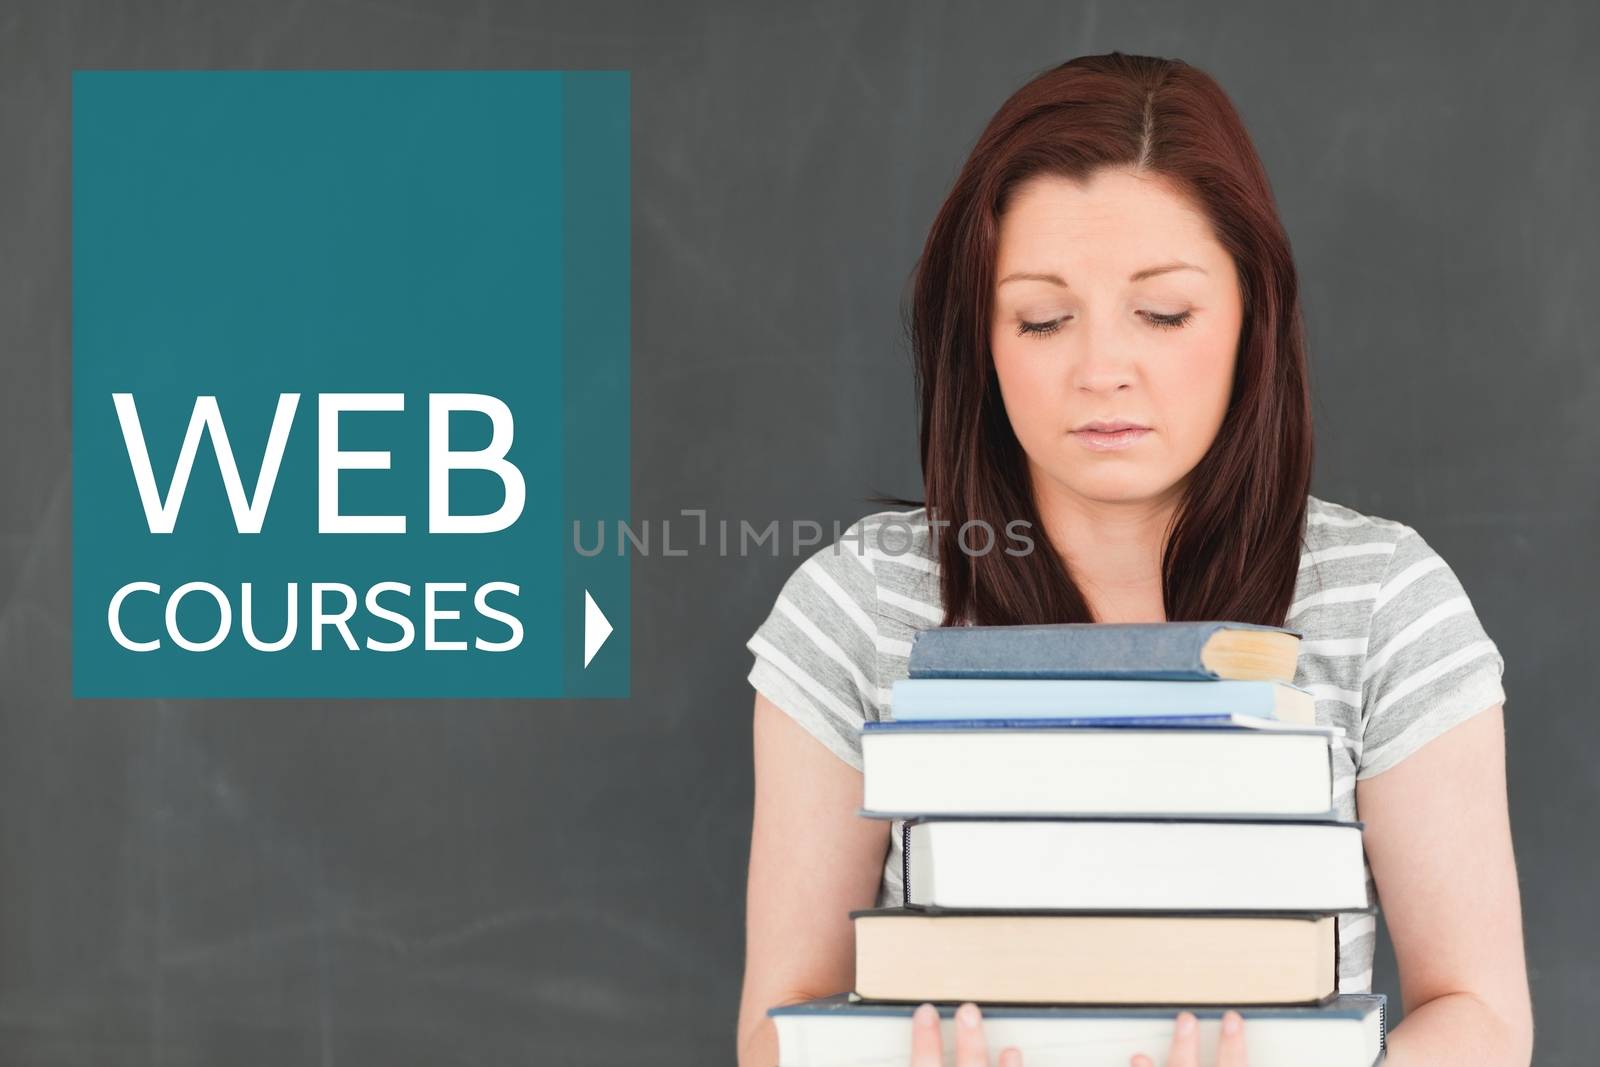 Digital composite of Education and web courses text and woman holding books